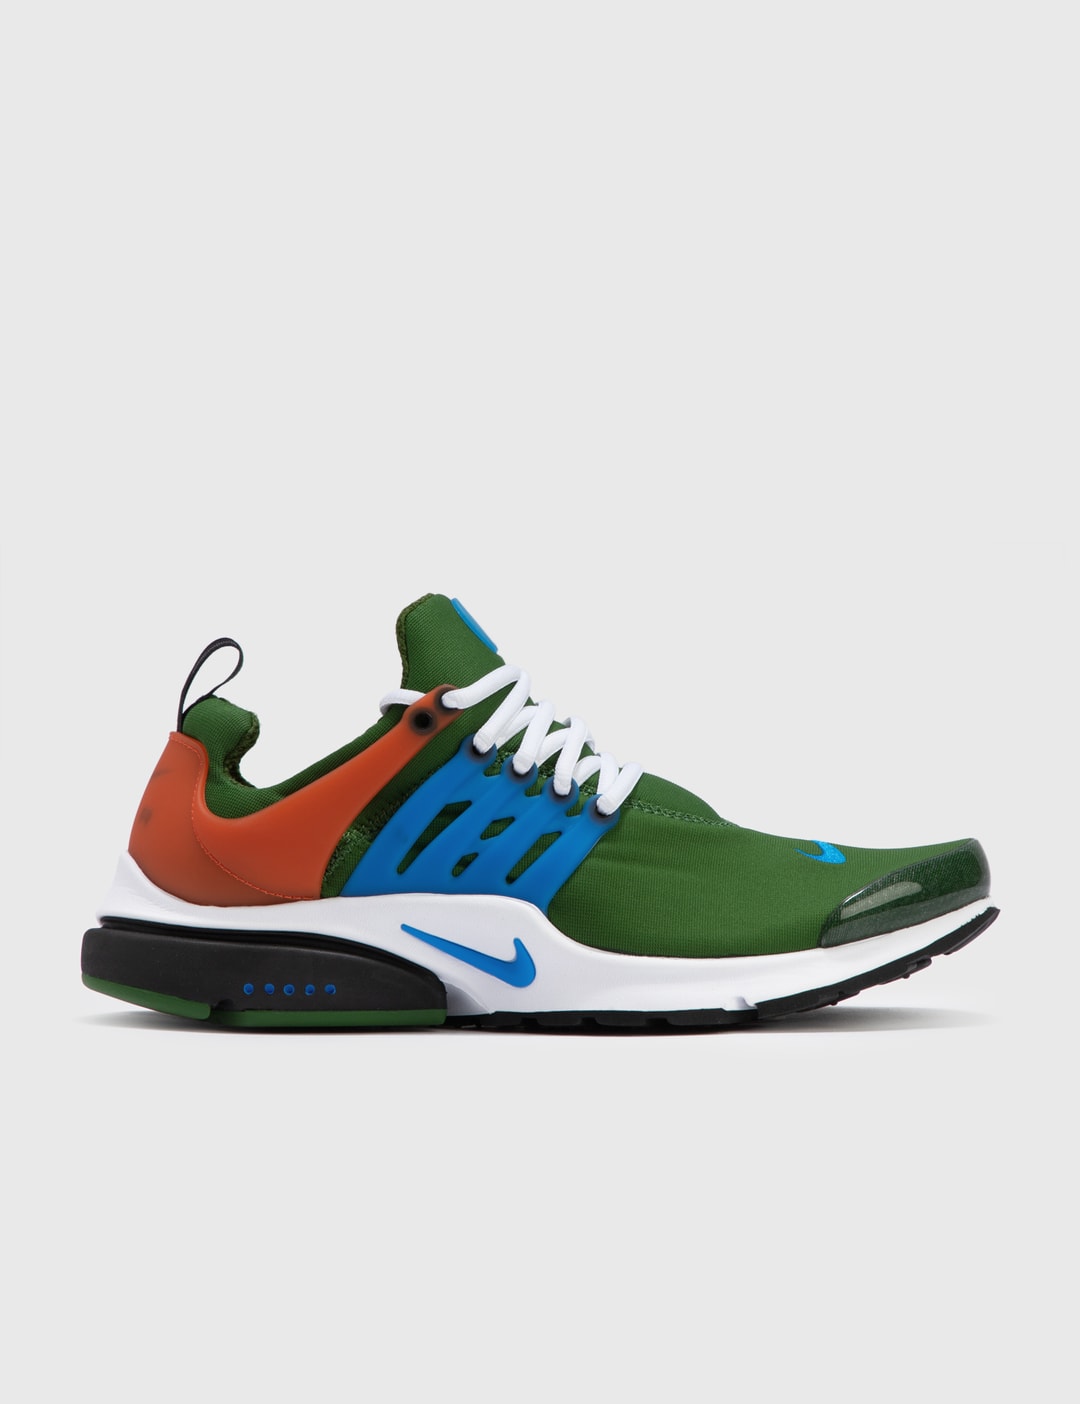 - Nike Air Presto | HBX - Globally Fashion and Lifestyle by Hypebeast